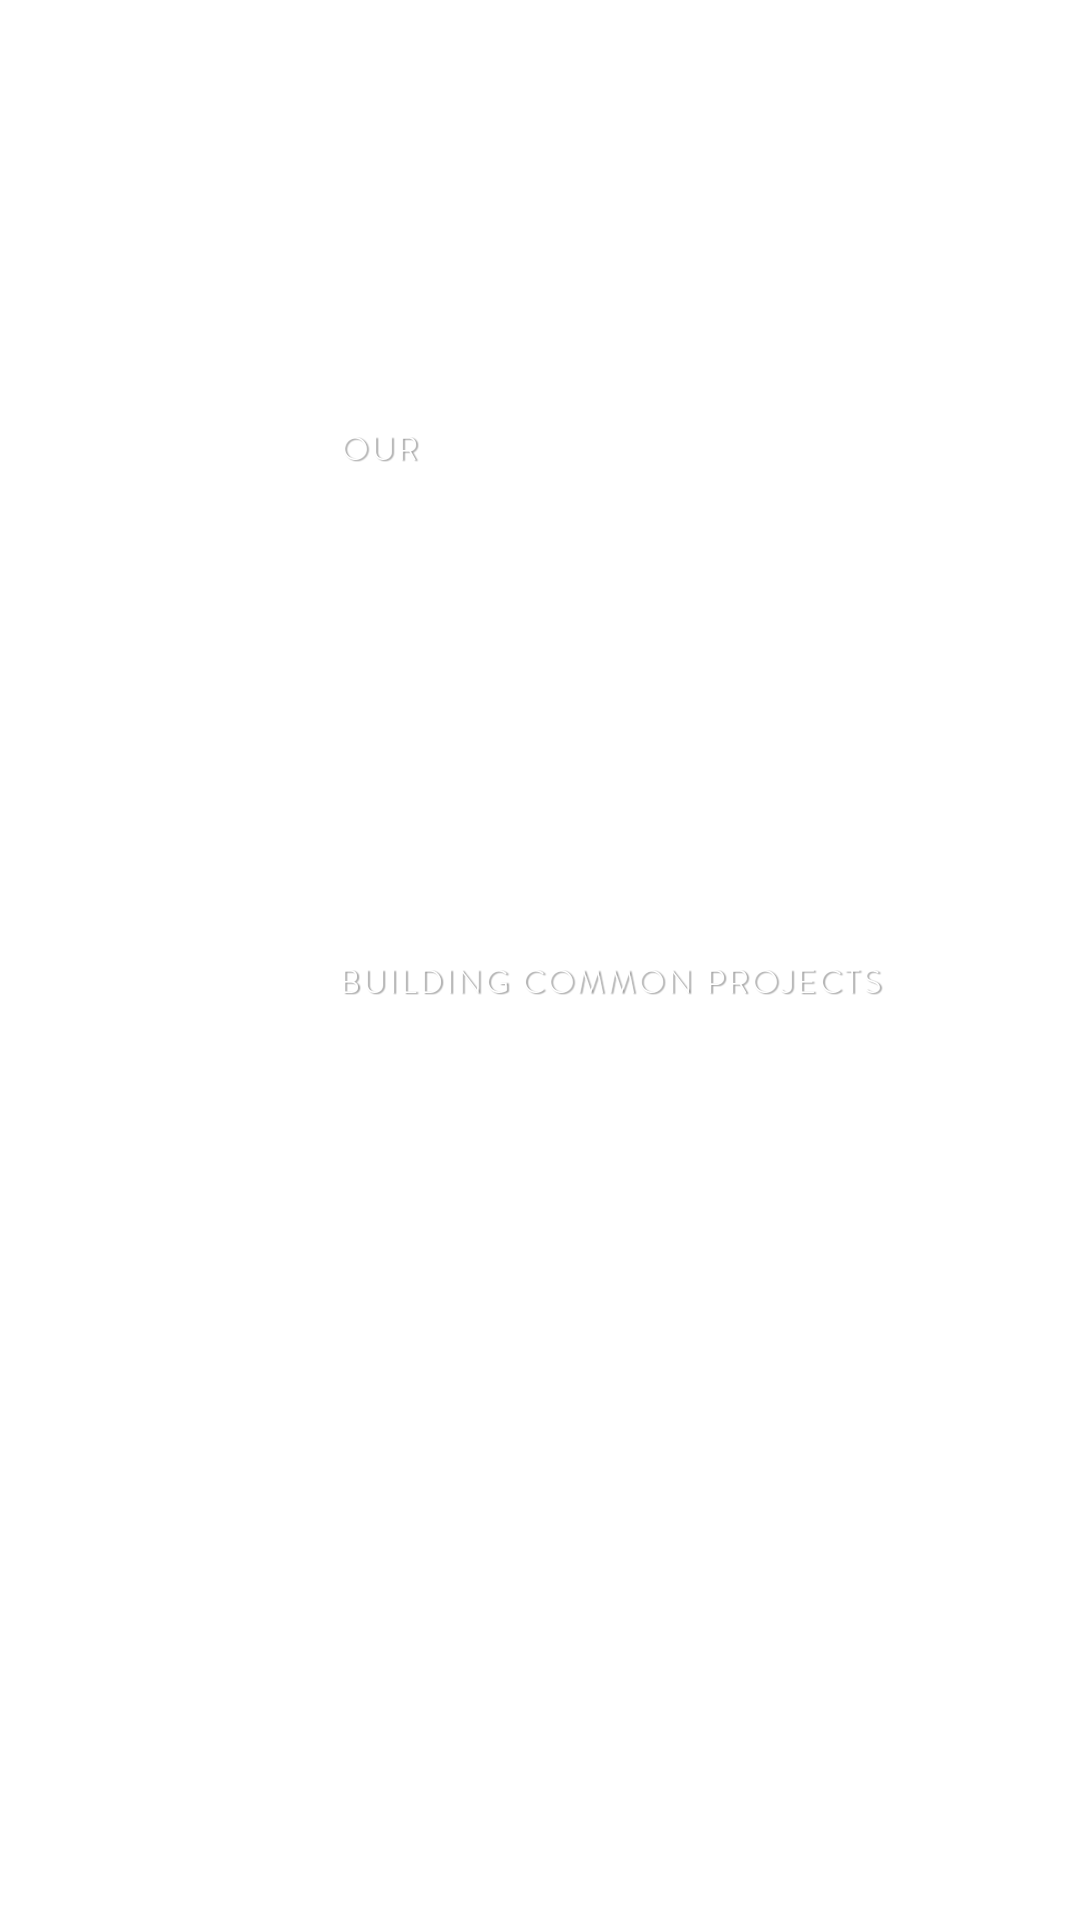 Our partners - building common projects